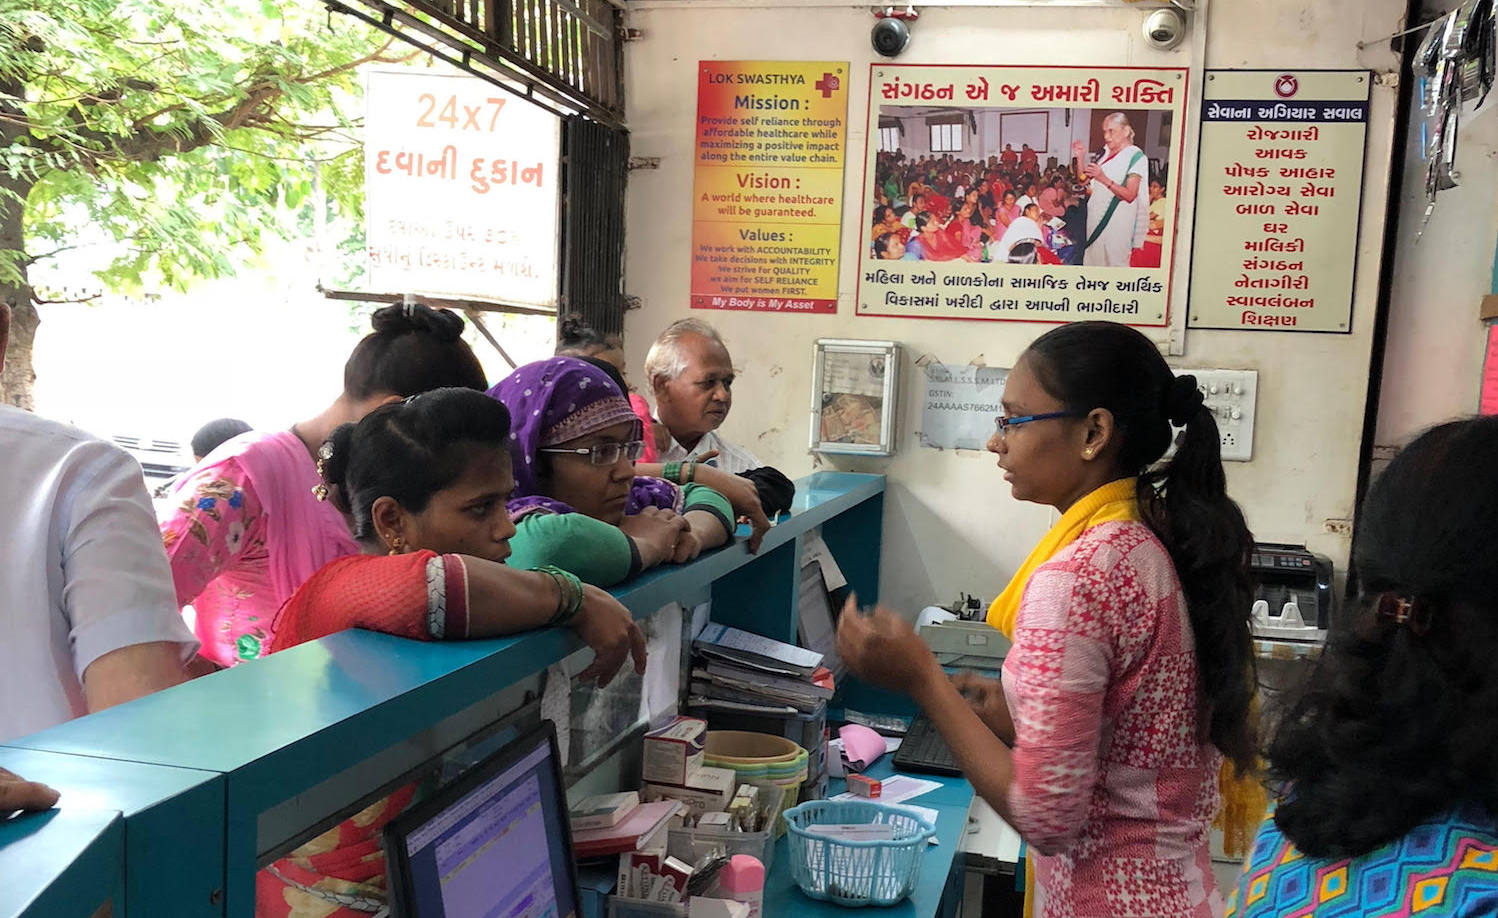 ​“We Are Poor but So Many”: Self-Employed Women’s Association of India and the Team of the Platform Co-op Development Kit